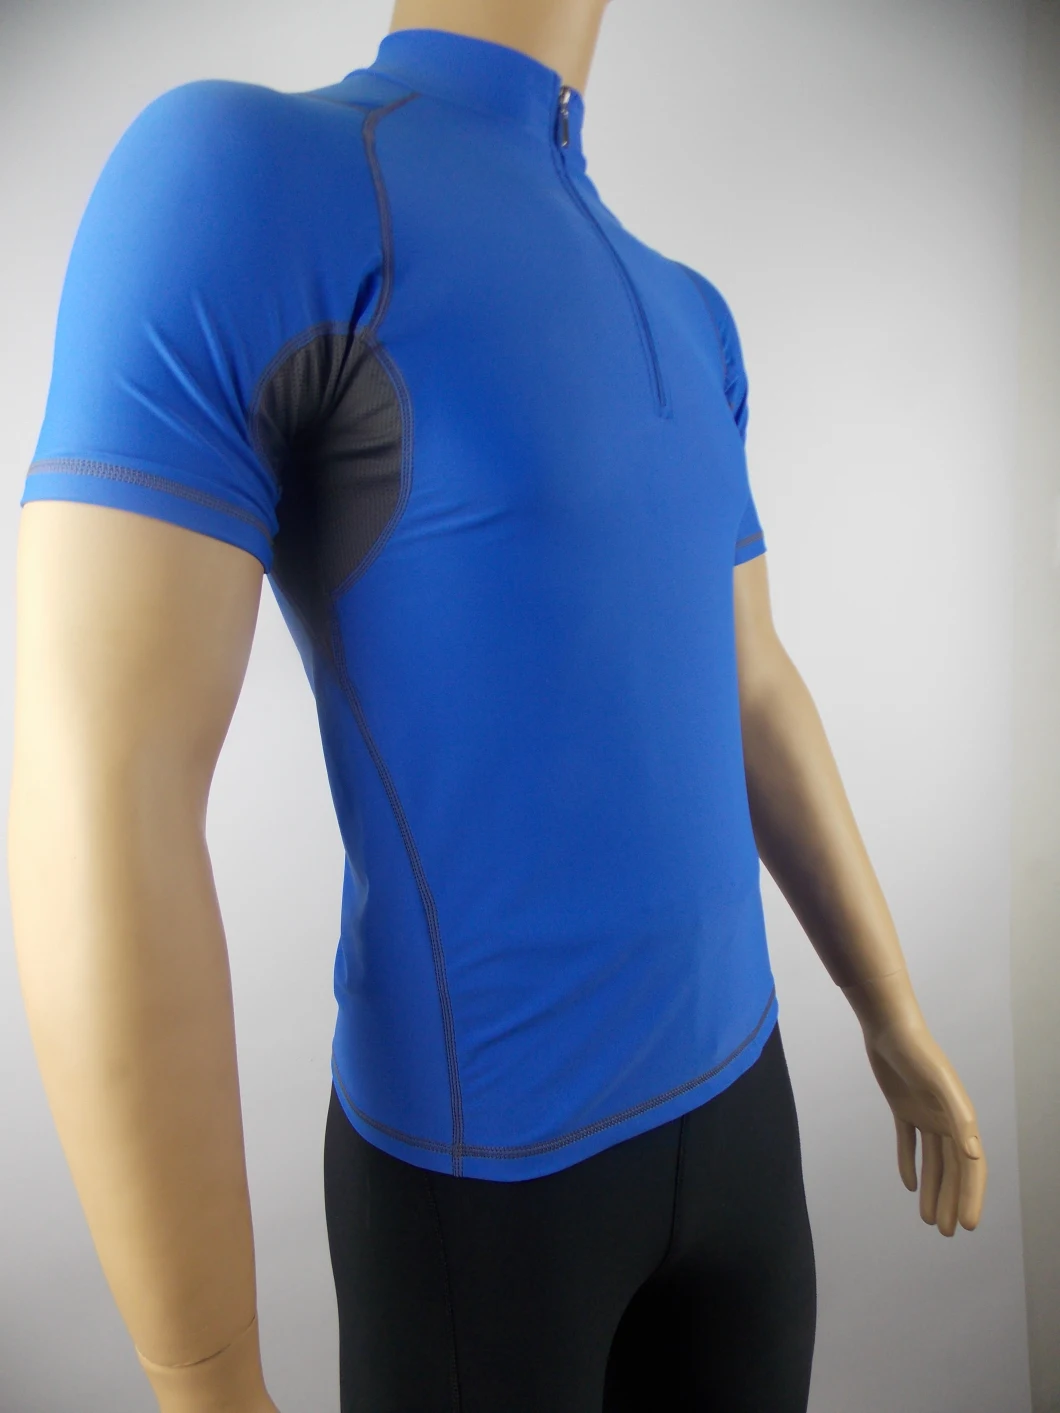 Custom Designs Quick Dry Fit Custom Gym Shirt Men Fitness Suit High Quality Compression Wear Shirts